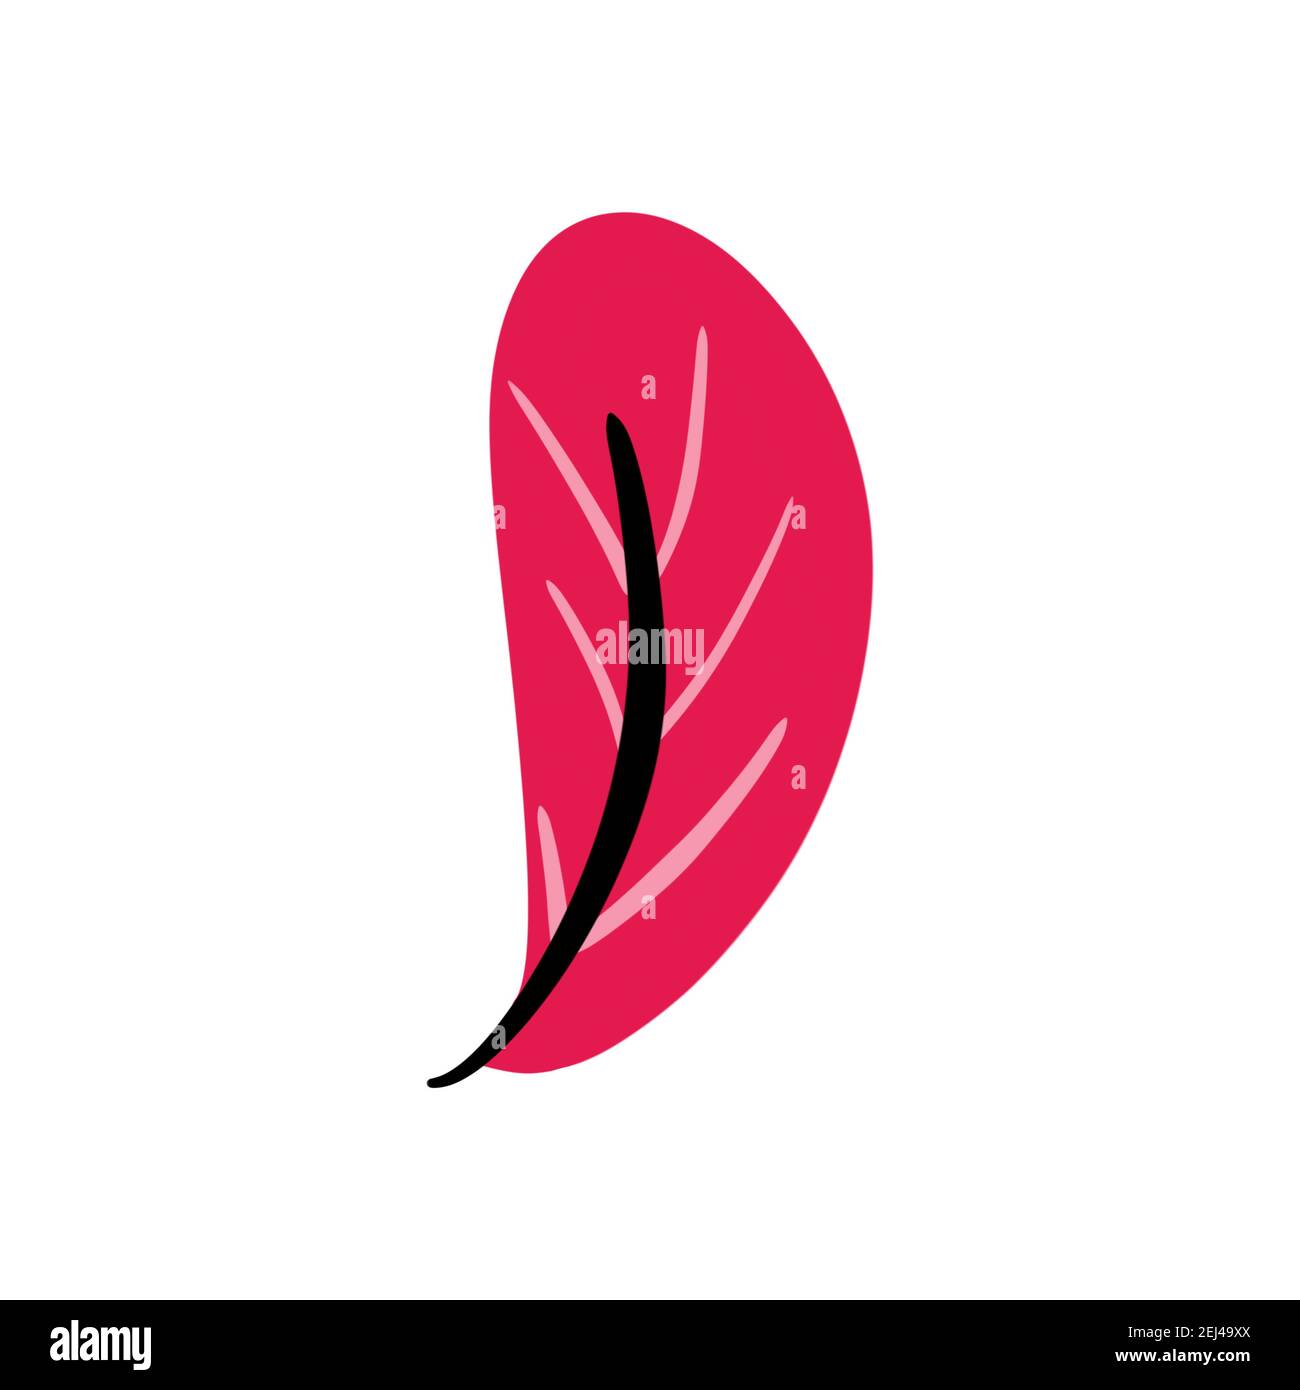 Modern leaf design, illustration in flat style of red leaves, white background Stock Photo